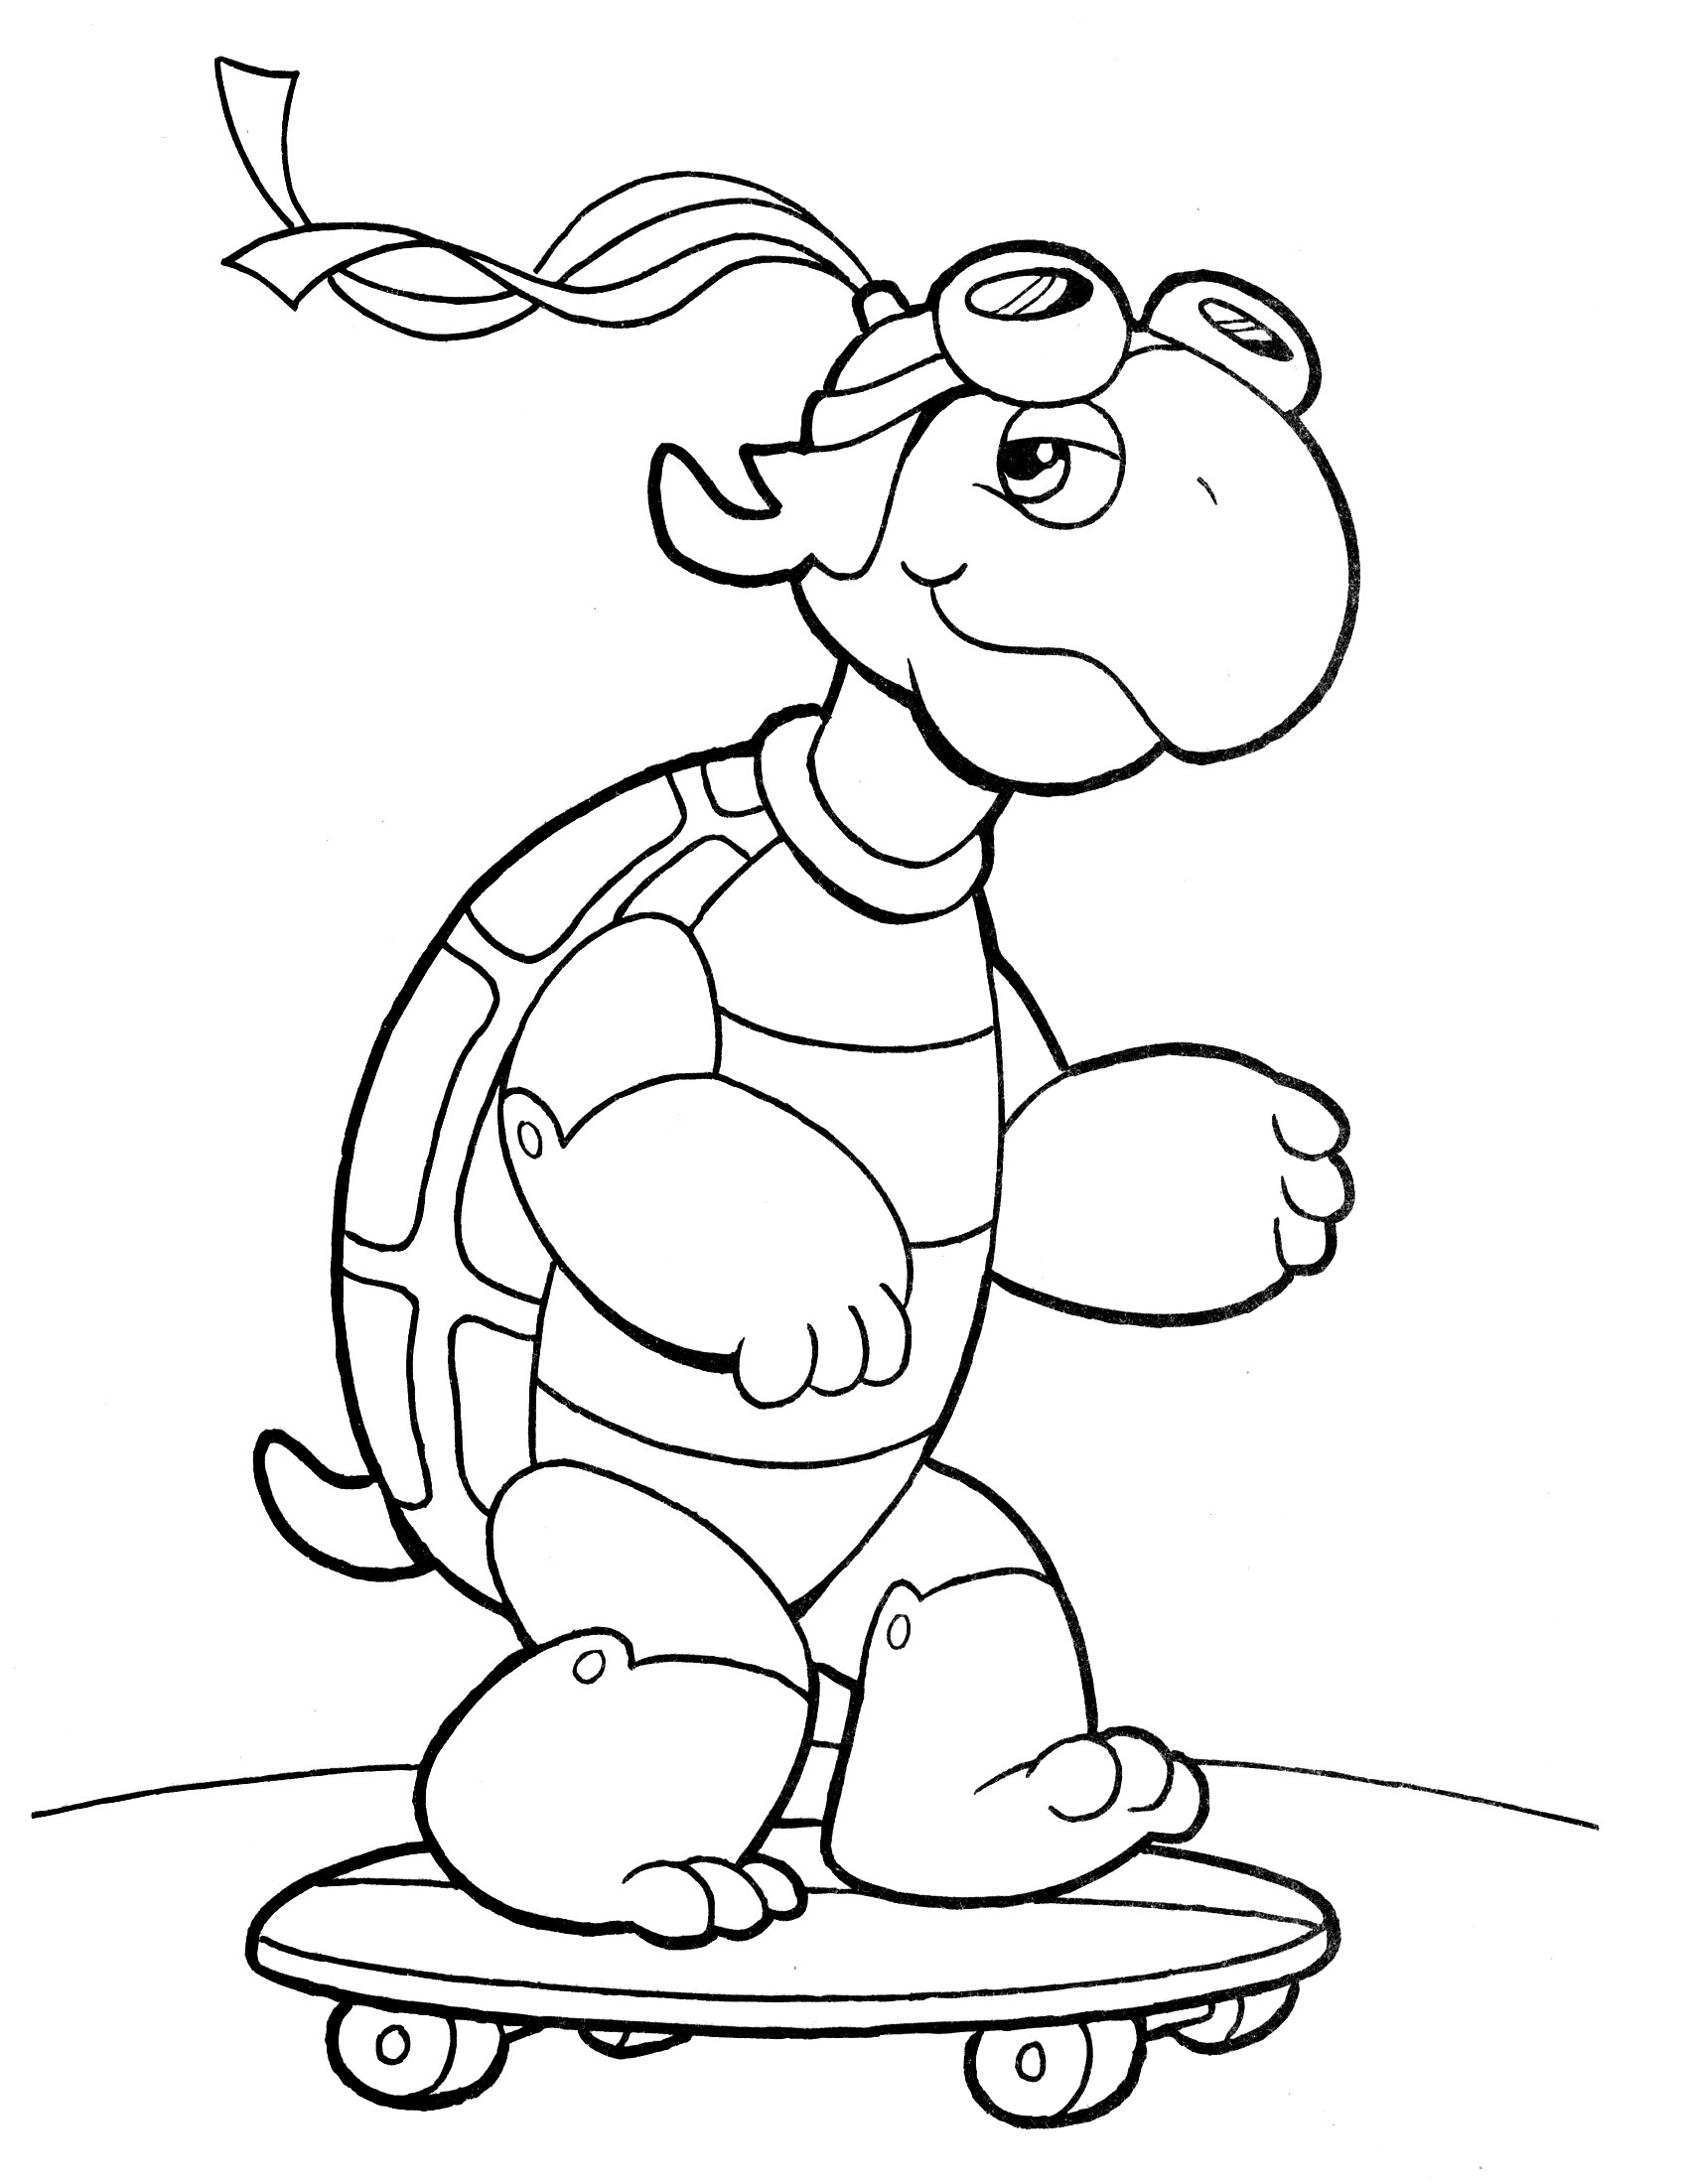 Crayola Summer Coloring Pages At Getcolorings.com | Free Printable